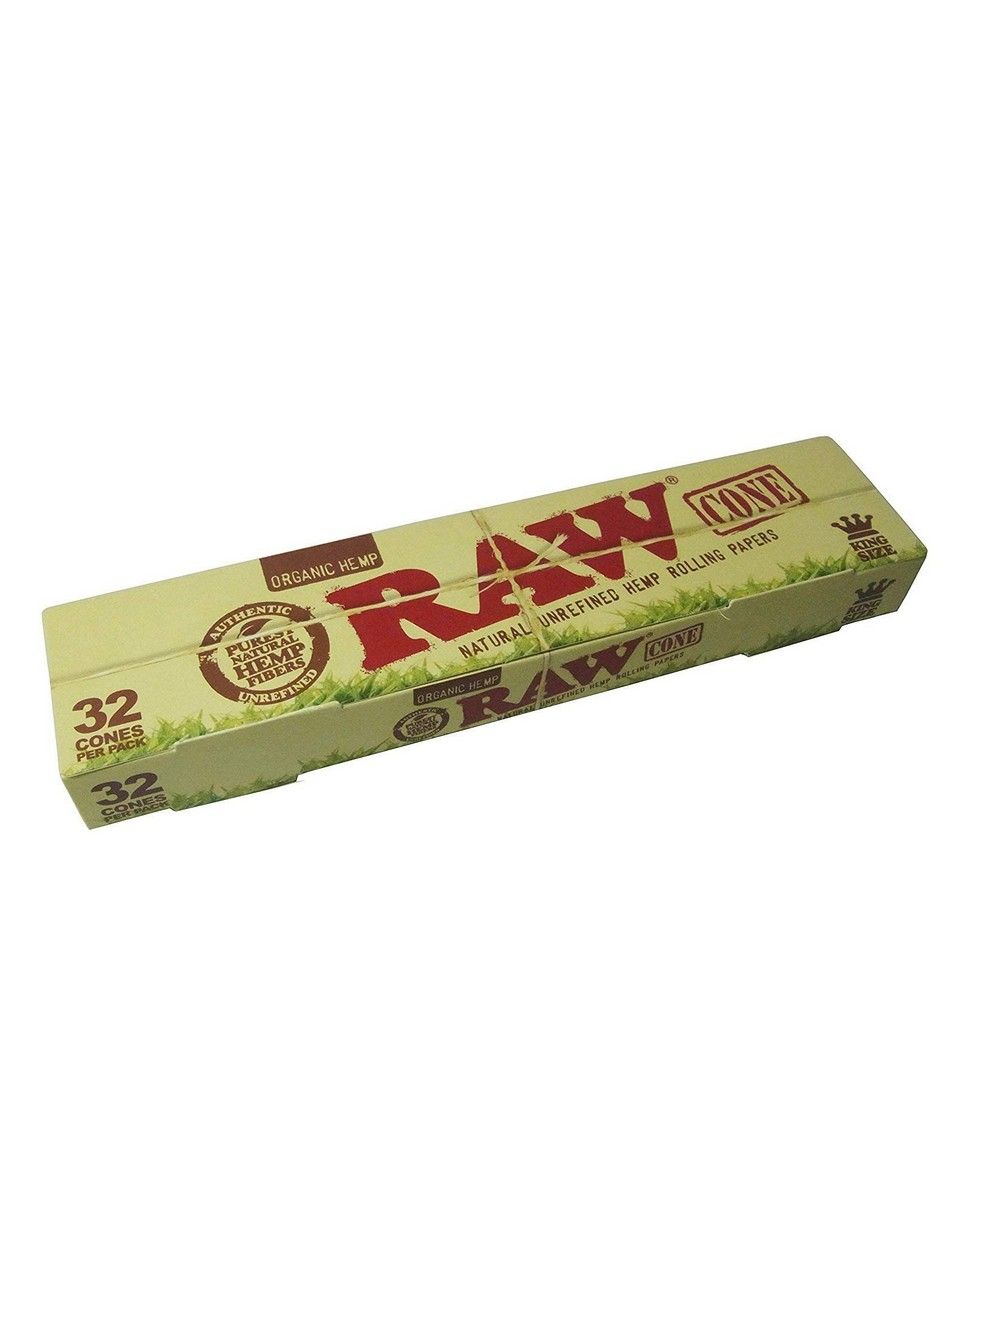 AUTHENTIC Raw ORGANIC Hemp 1-1/4 PreRolled Cones Fast Free Shipping 32 CONES 